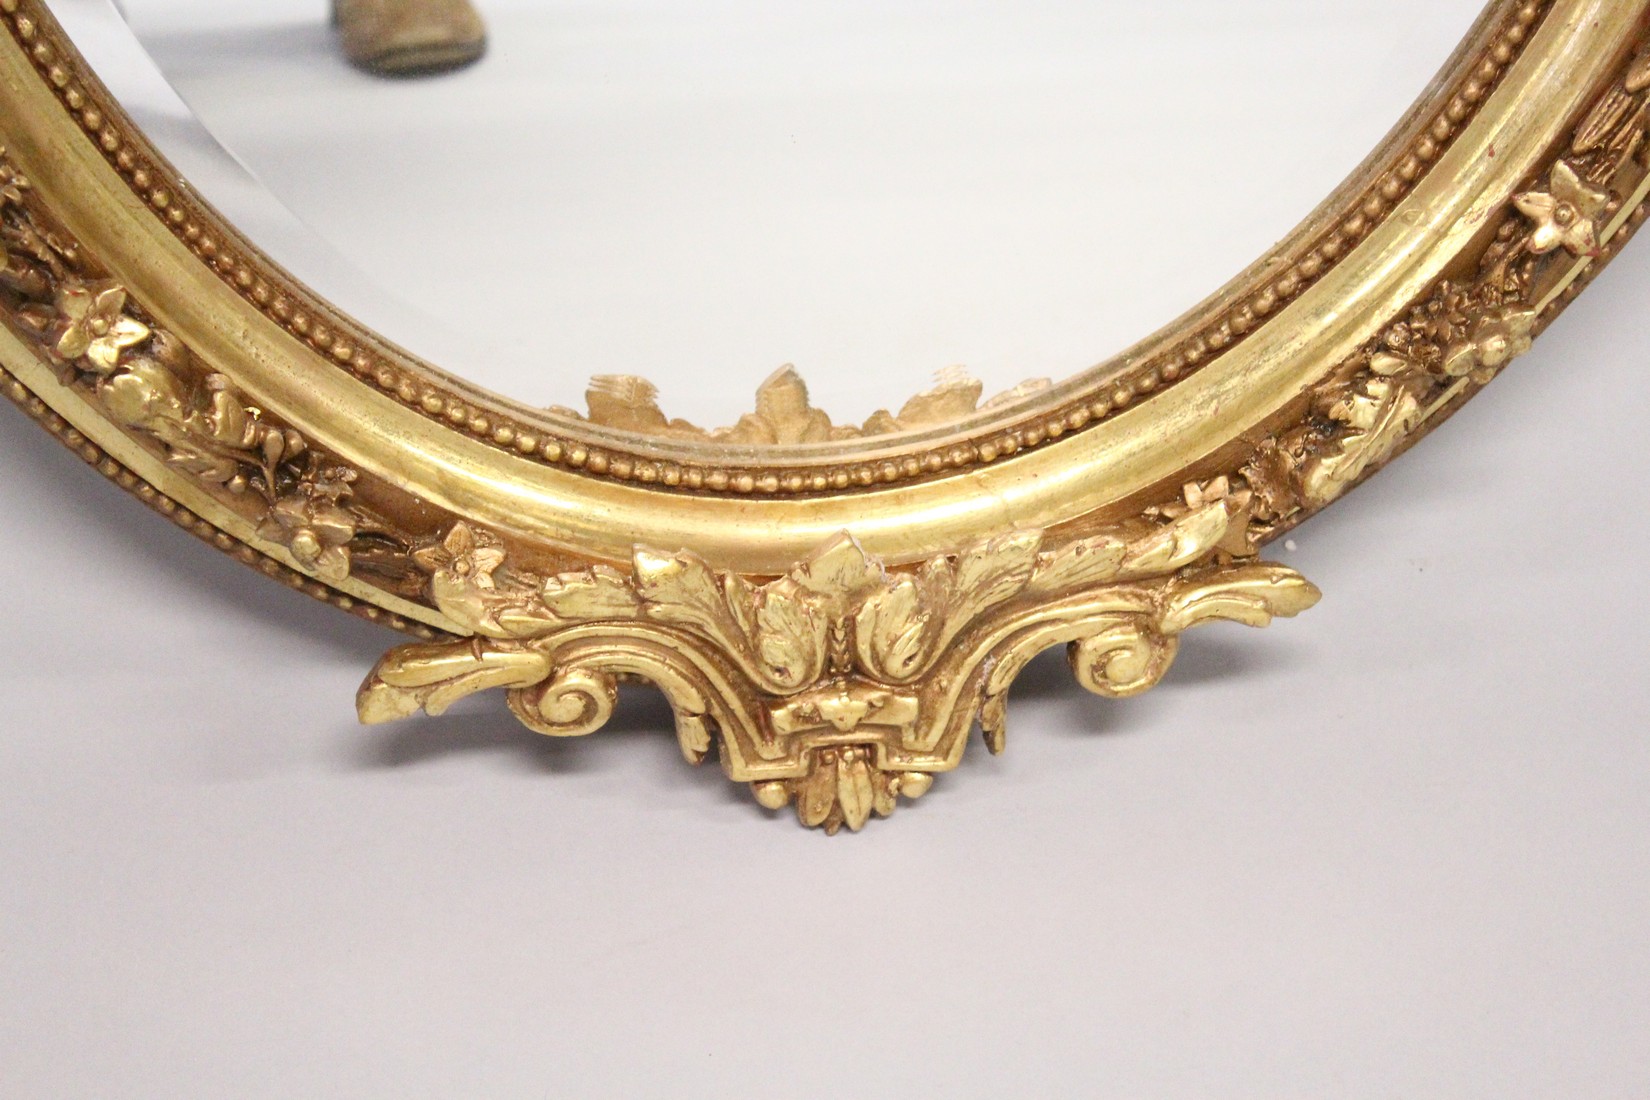 A DECORATIVE GILT FRAMED OVAL WALL MIRROR 3ft 7ins high x 2ft 6ins wide - Image 4 of 5